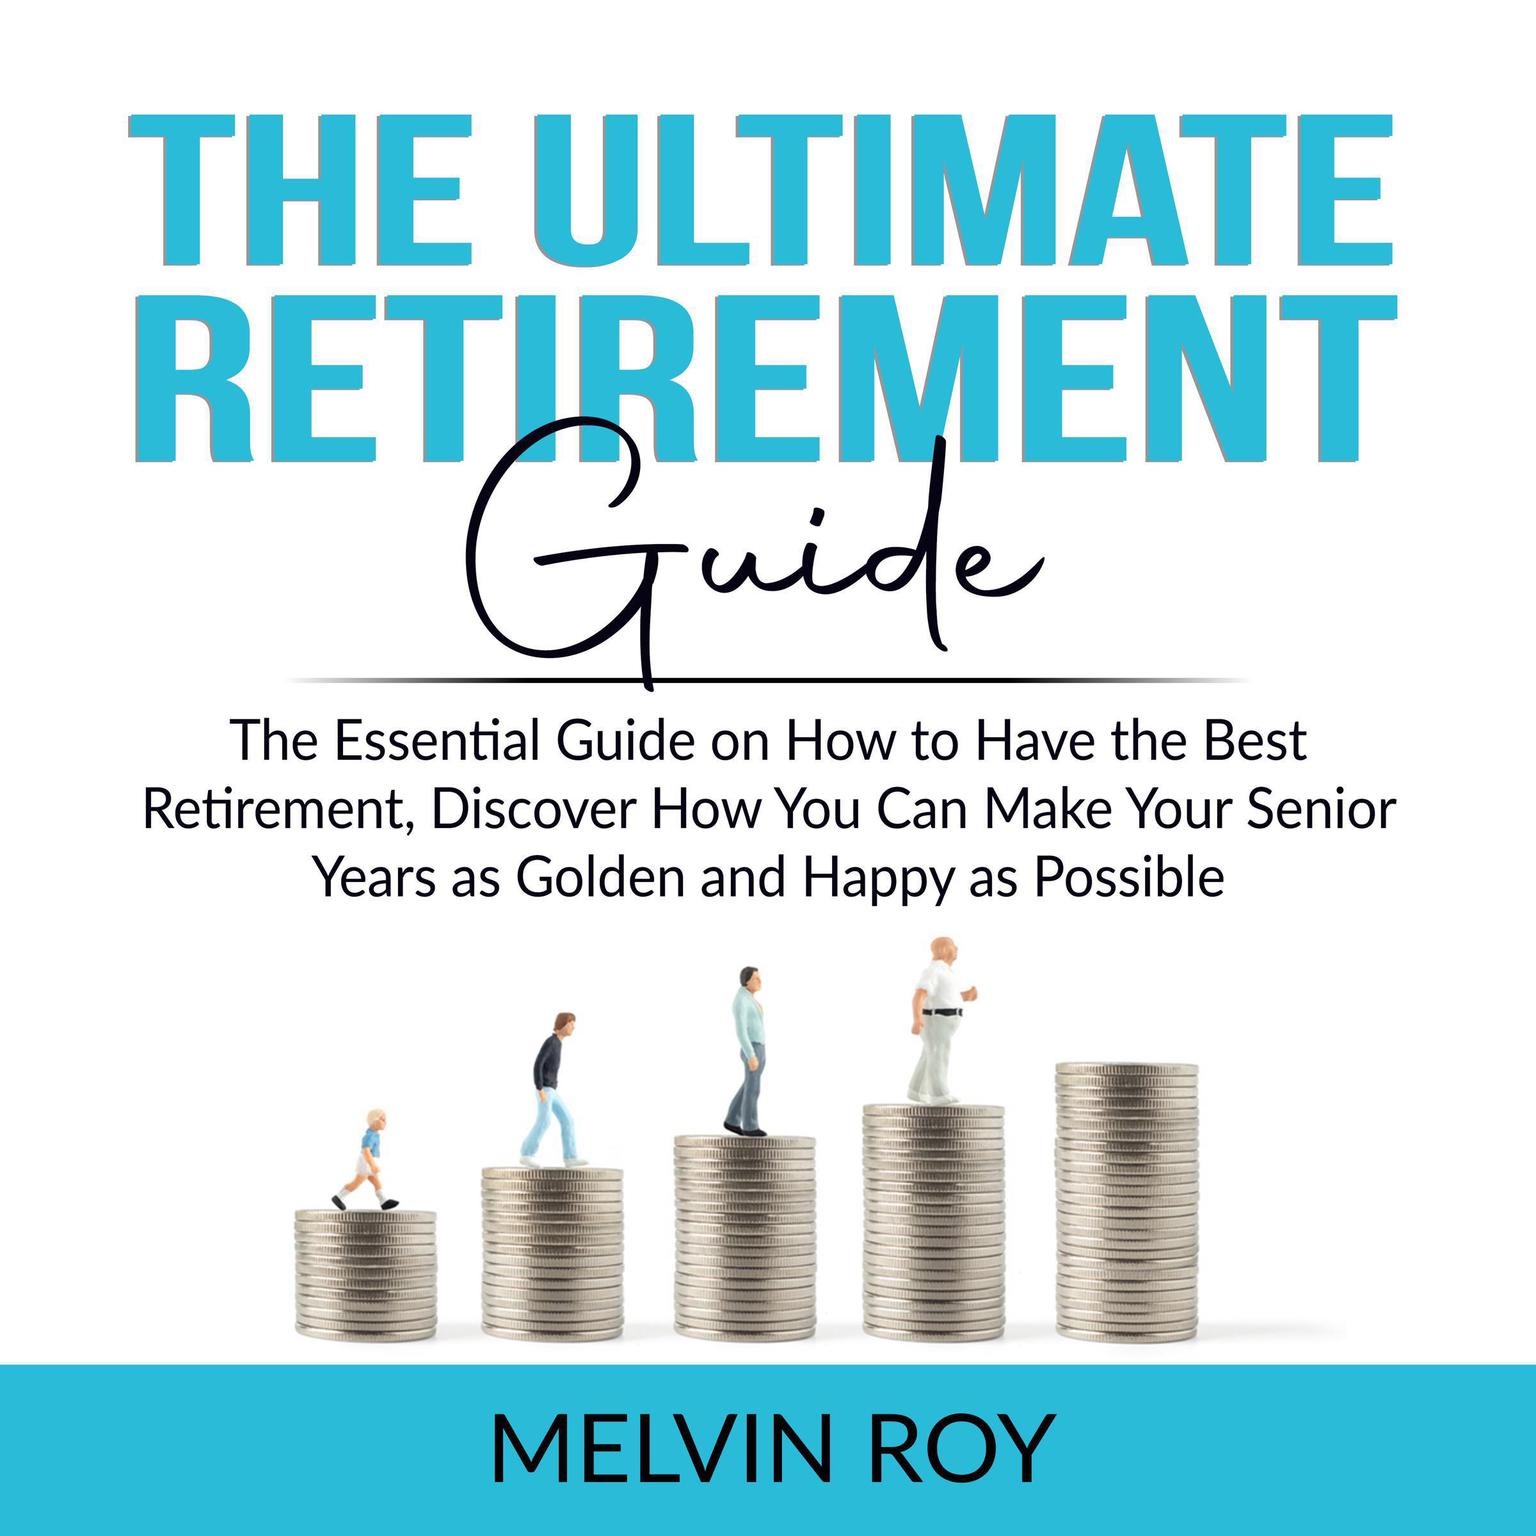 The Ultimate Retirement Guide: The Essential Guide on How to Have the Best Retirement, Discover How You Can Make Your Senior Years as Golden and Happy as Possible  Audiobook, by Melvin Roy